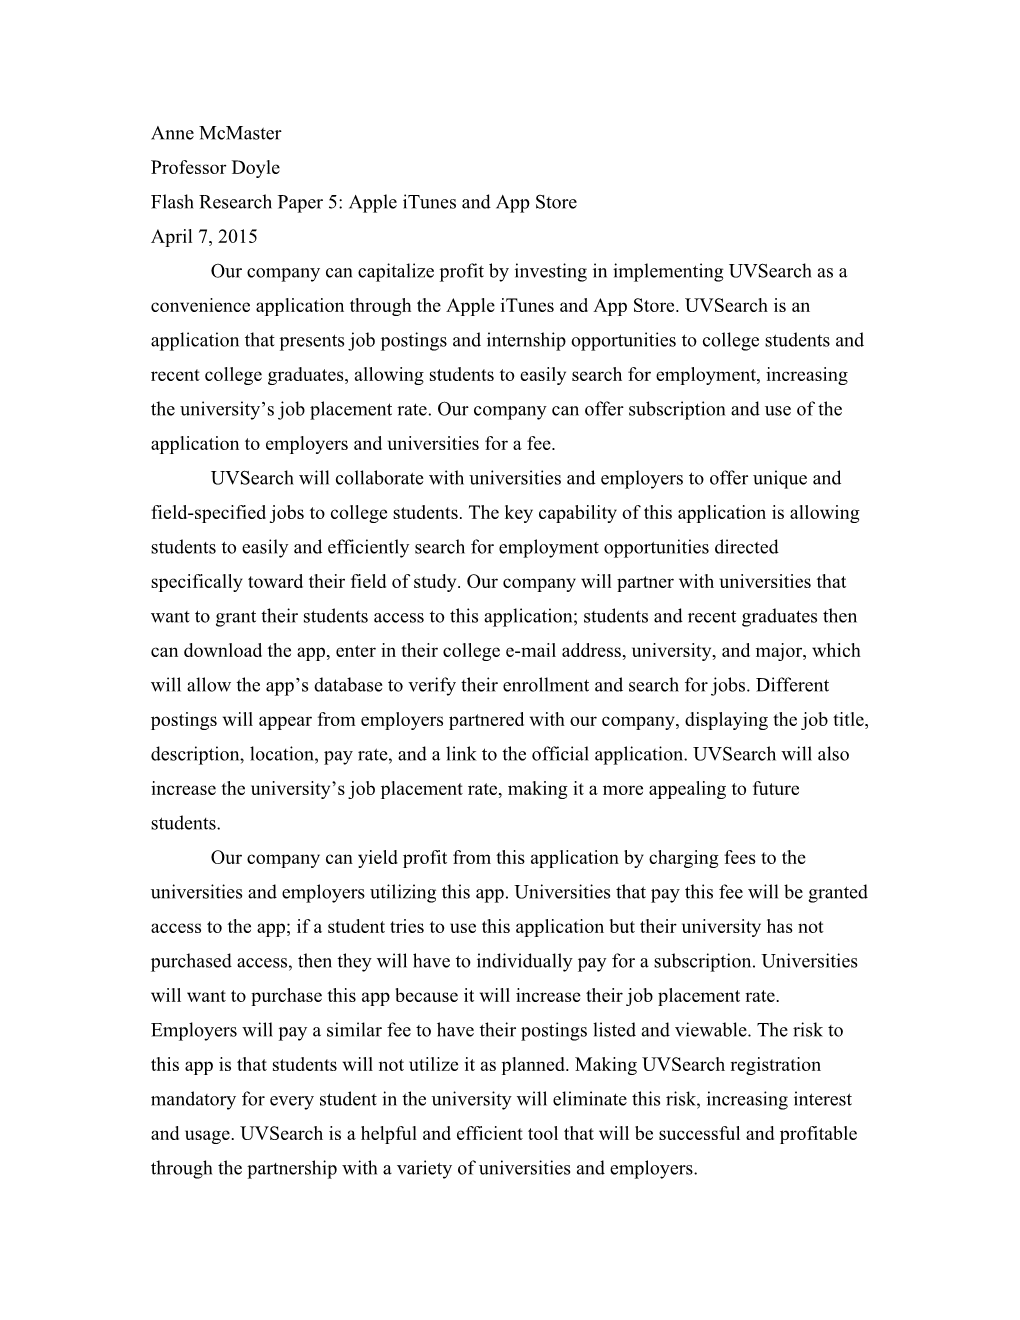 Flash Research Paper 5: Apple Itunes and App Store